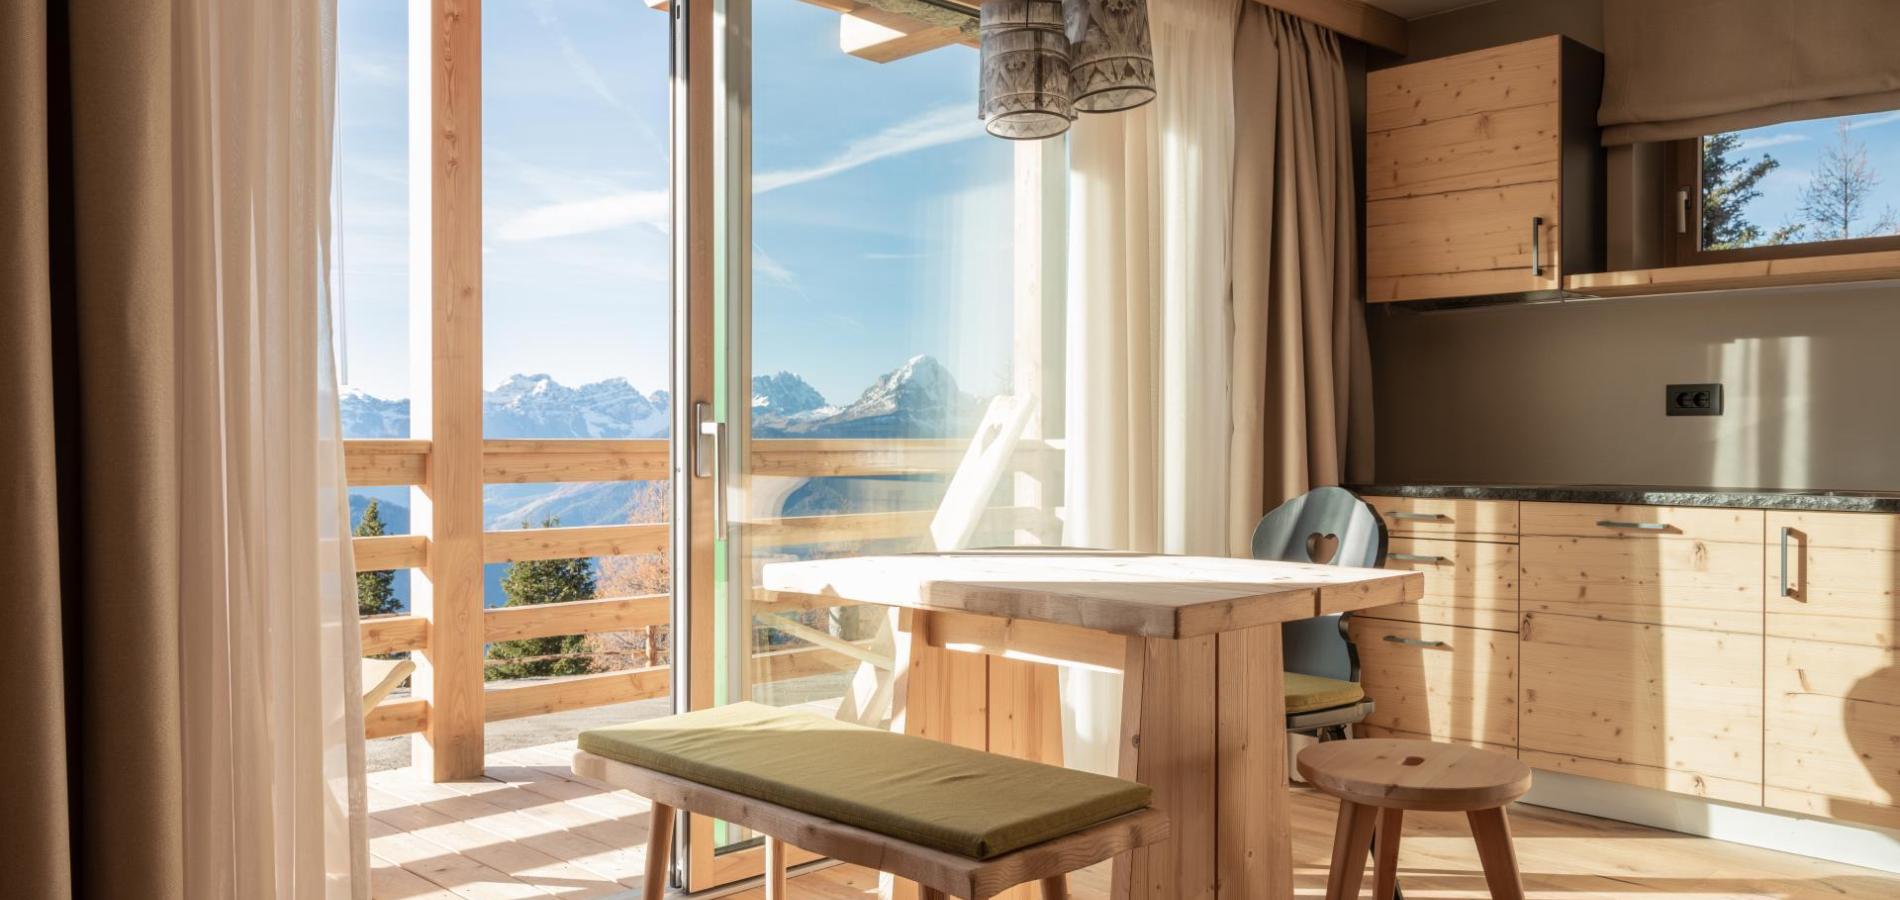 Living area of a chalet with balcony and kitchenette